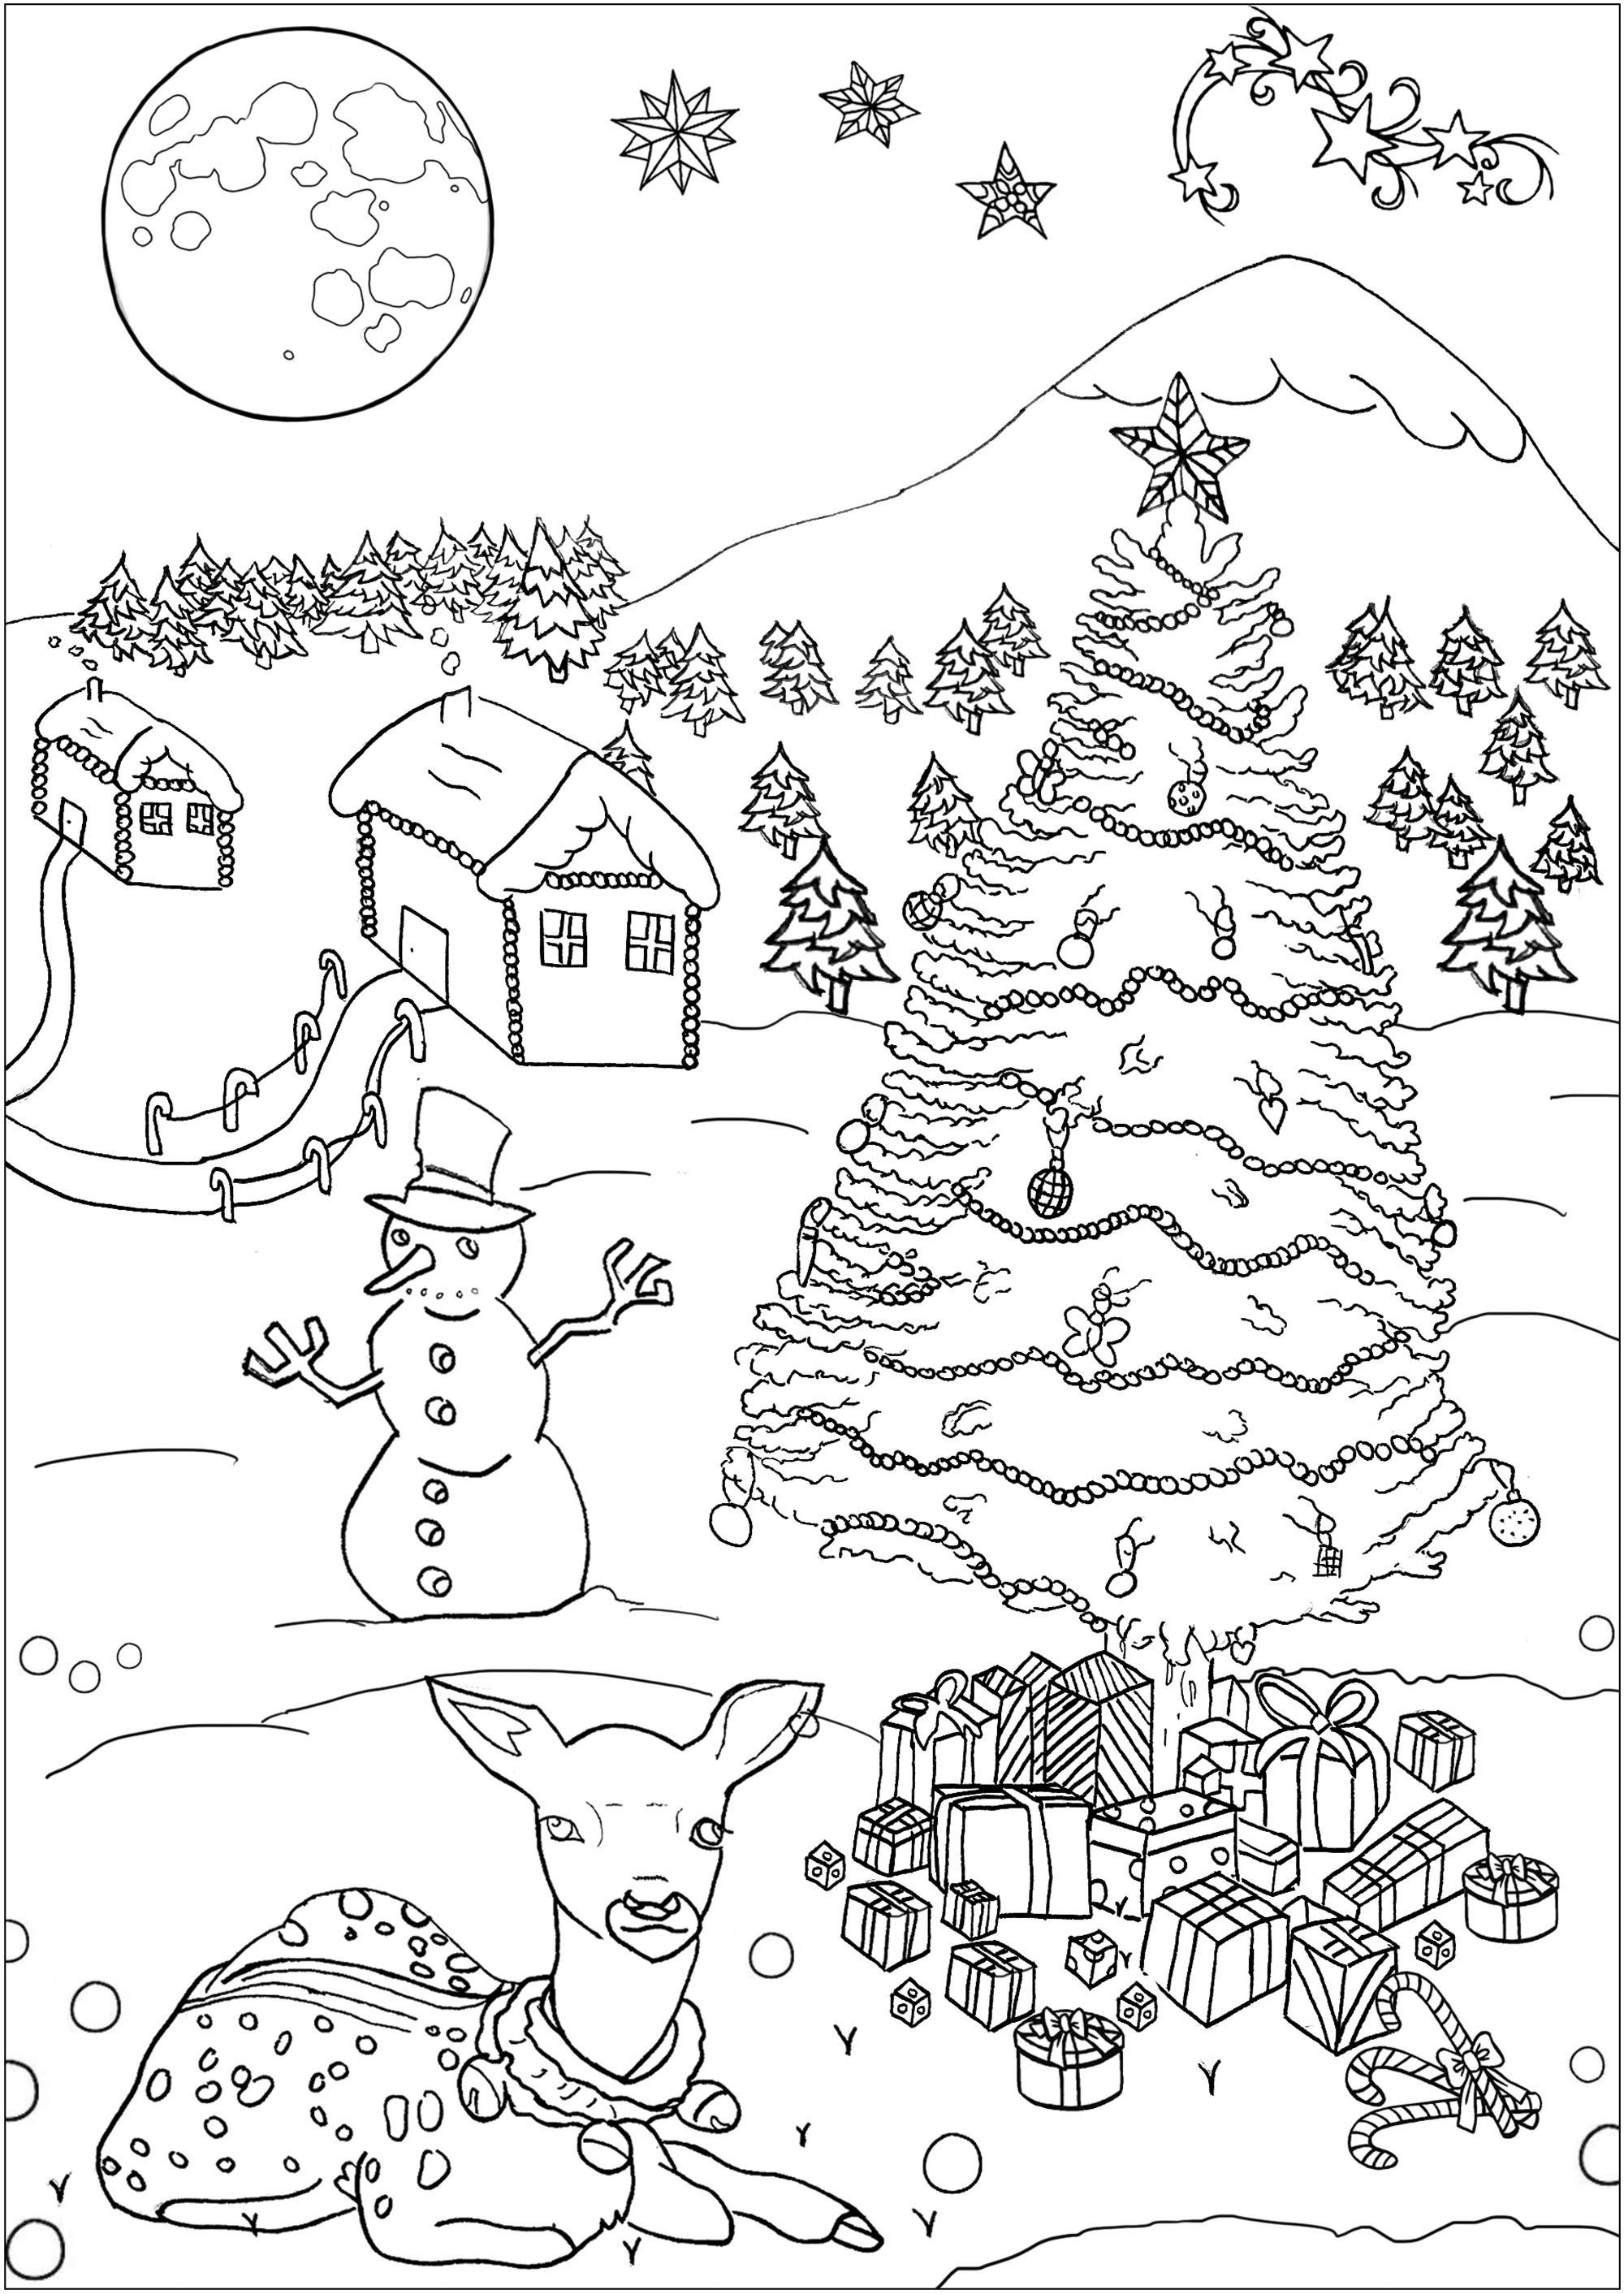 Children's Christmas Coloring Pages Free Christmas Free To Color For Children Christmas Kids Coloring Pages